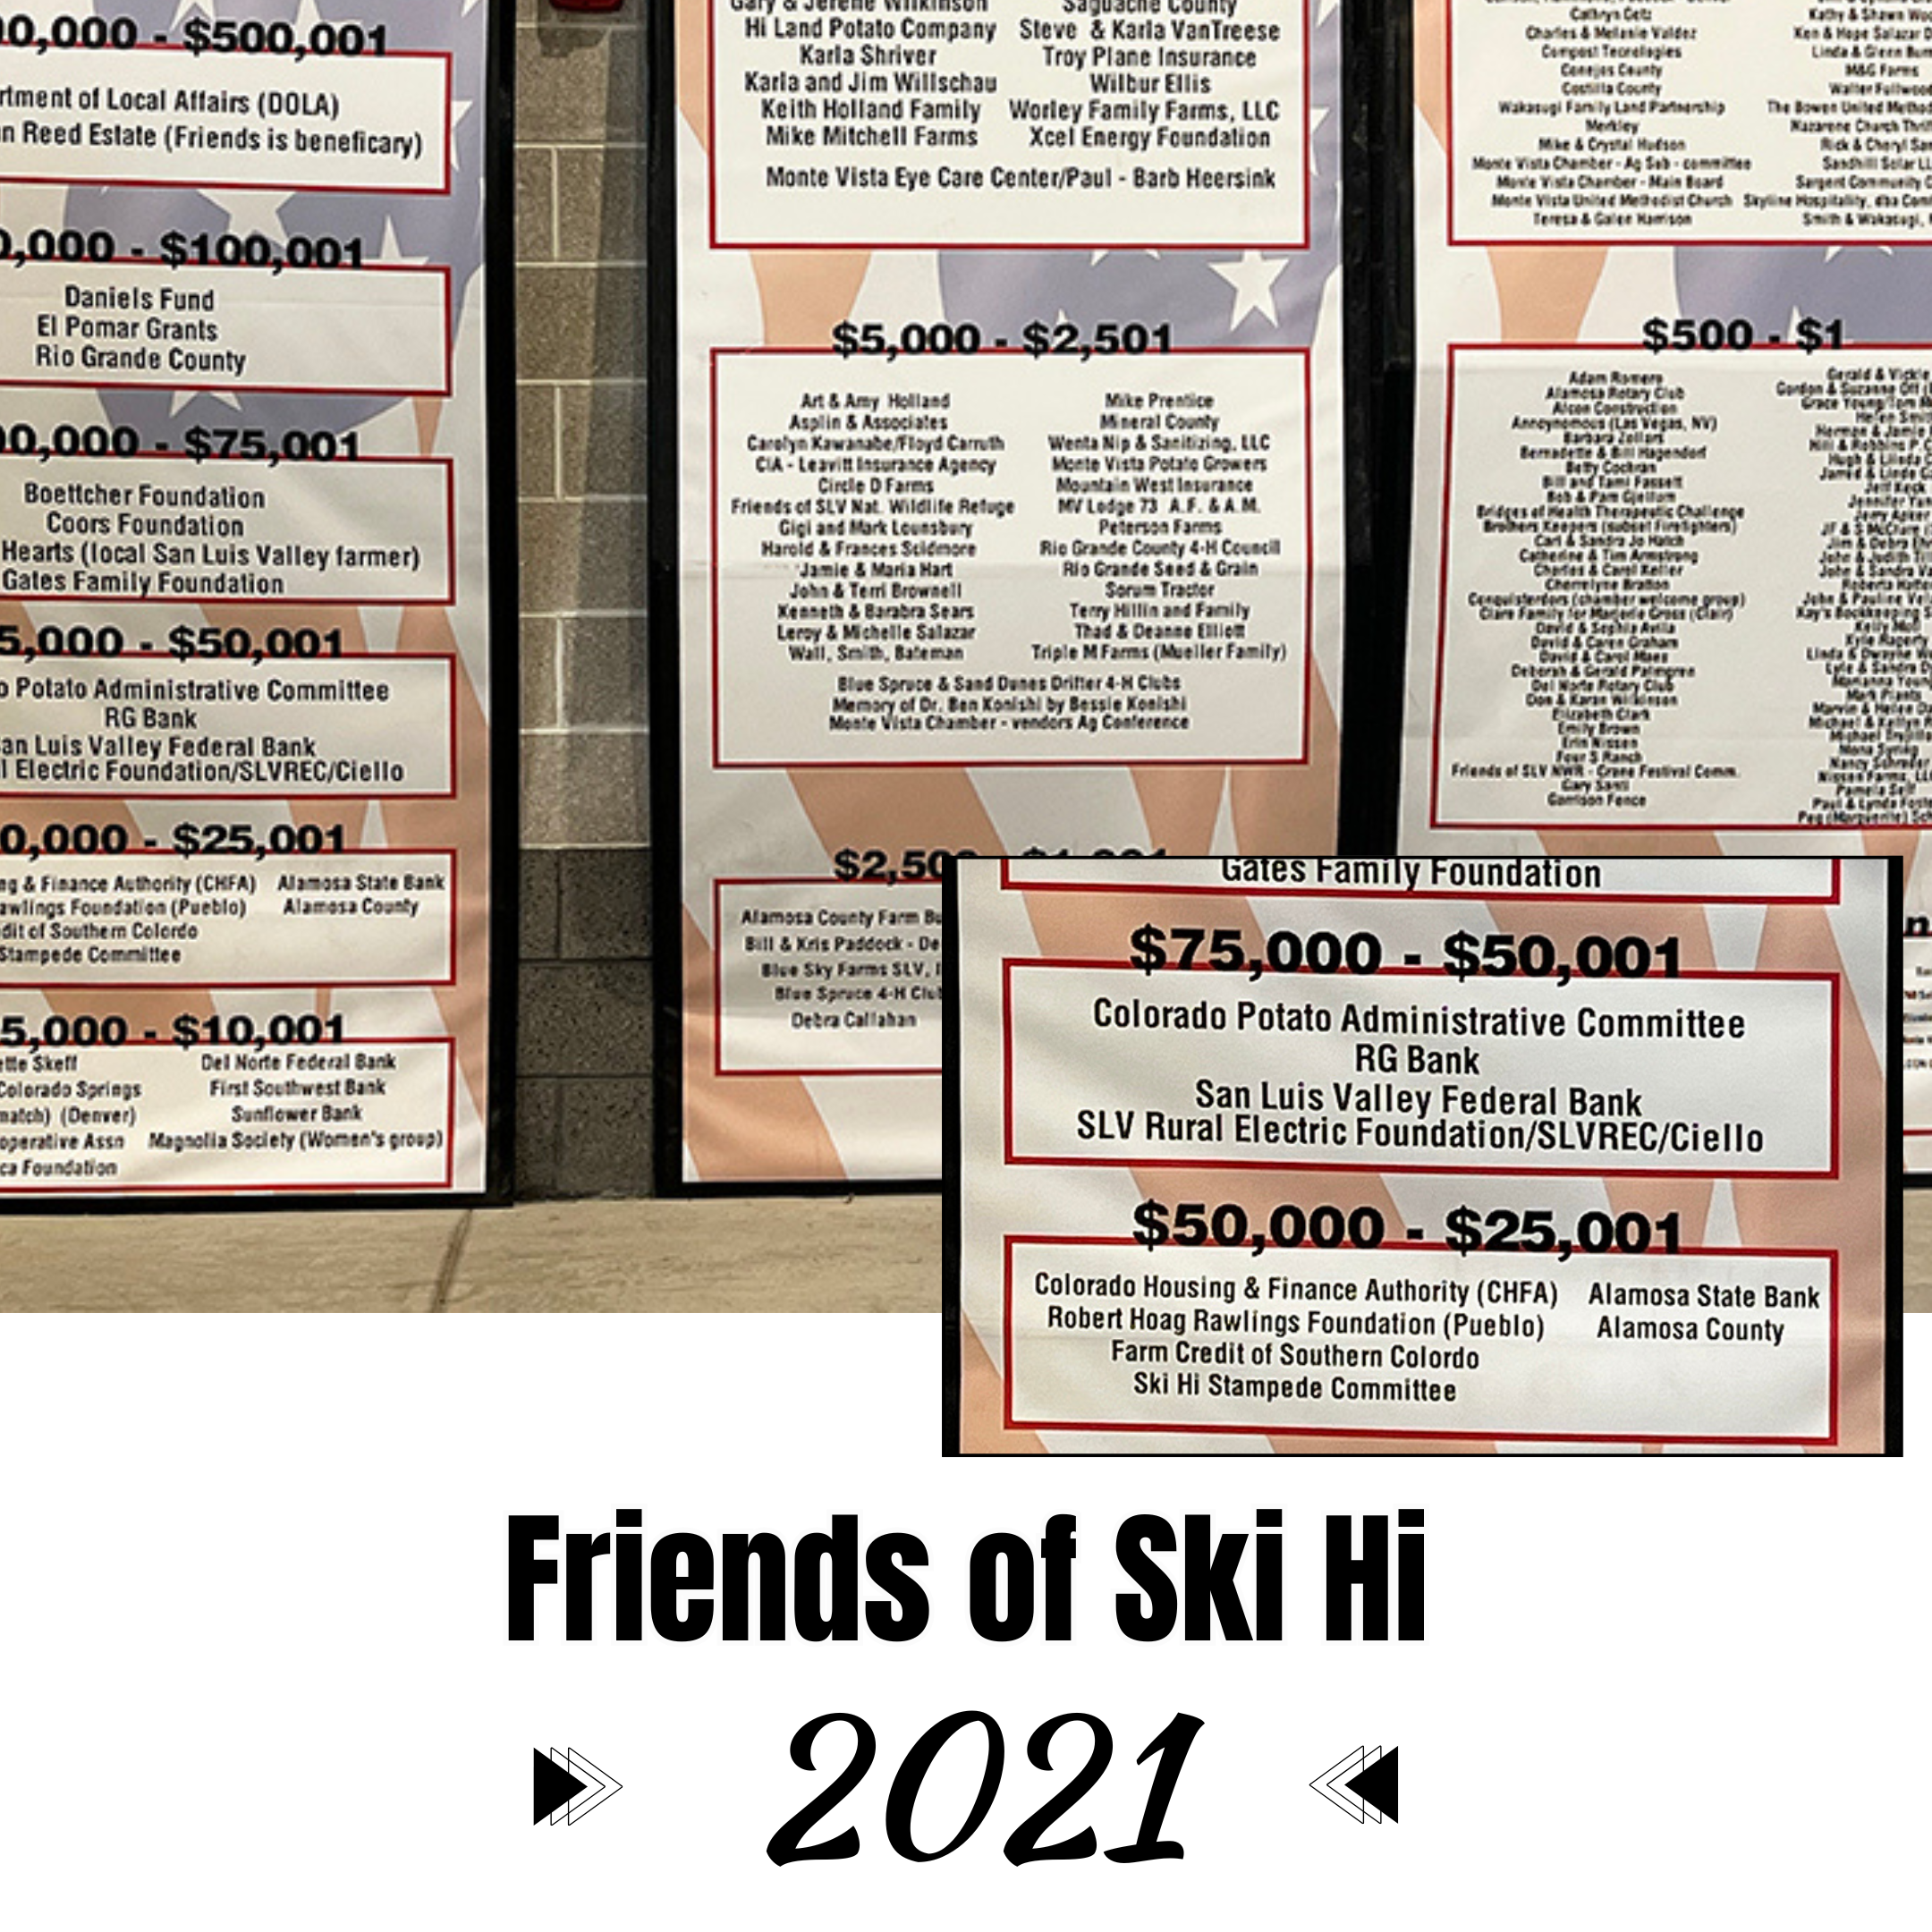 Friends of Ski Hi donors and dollar amounts